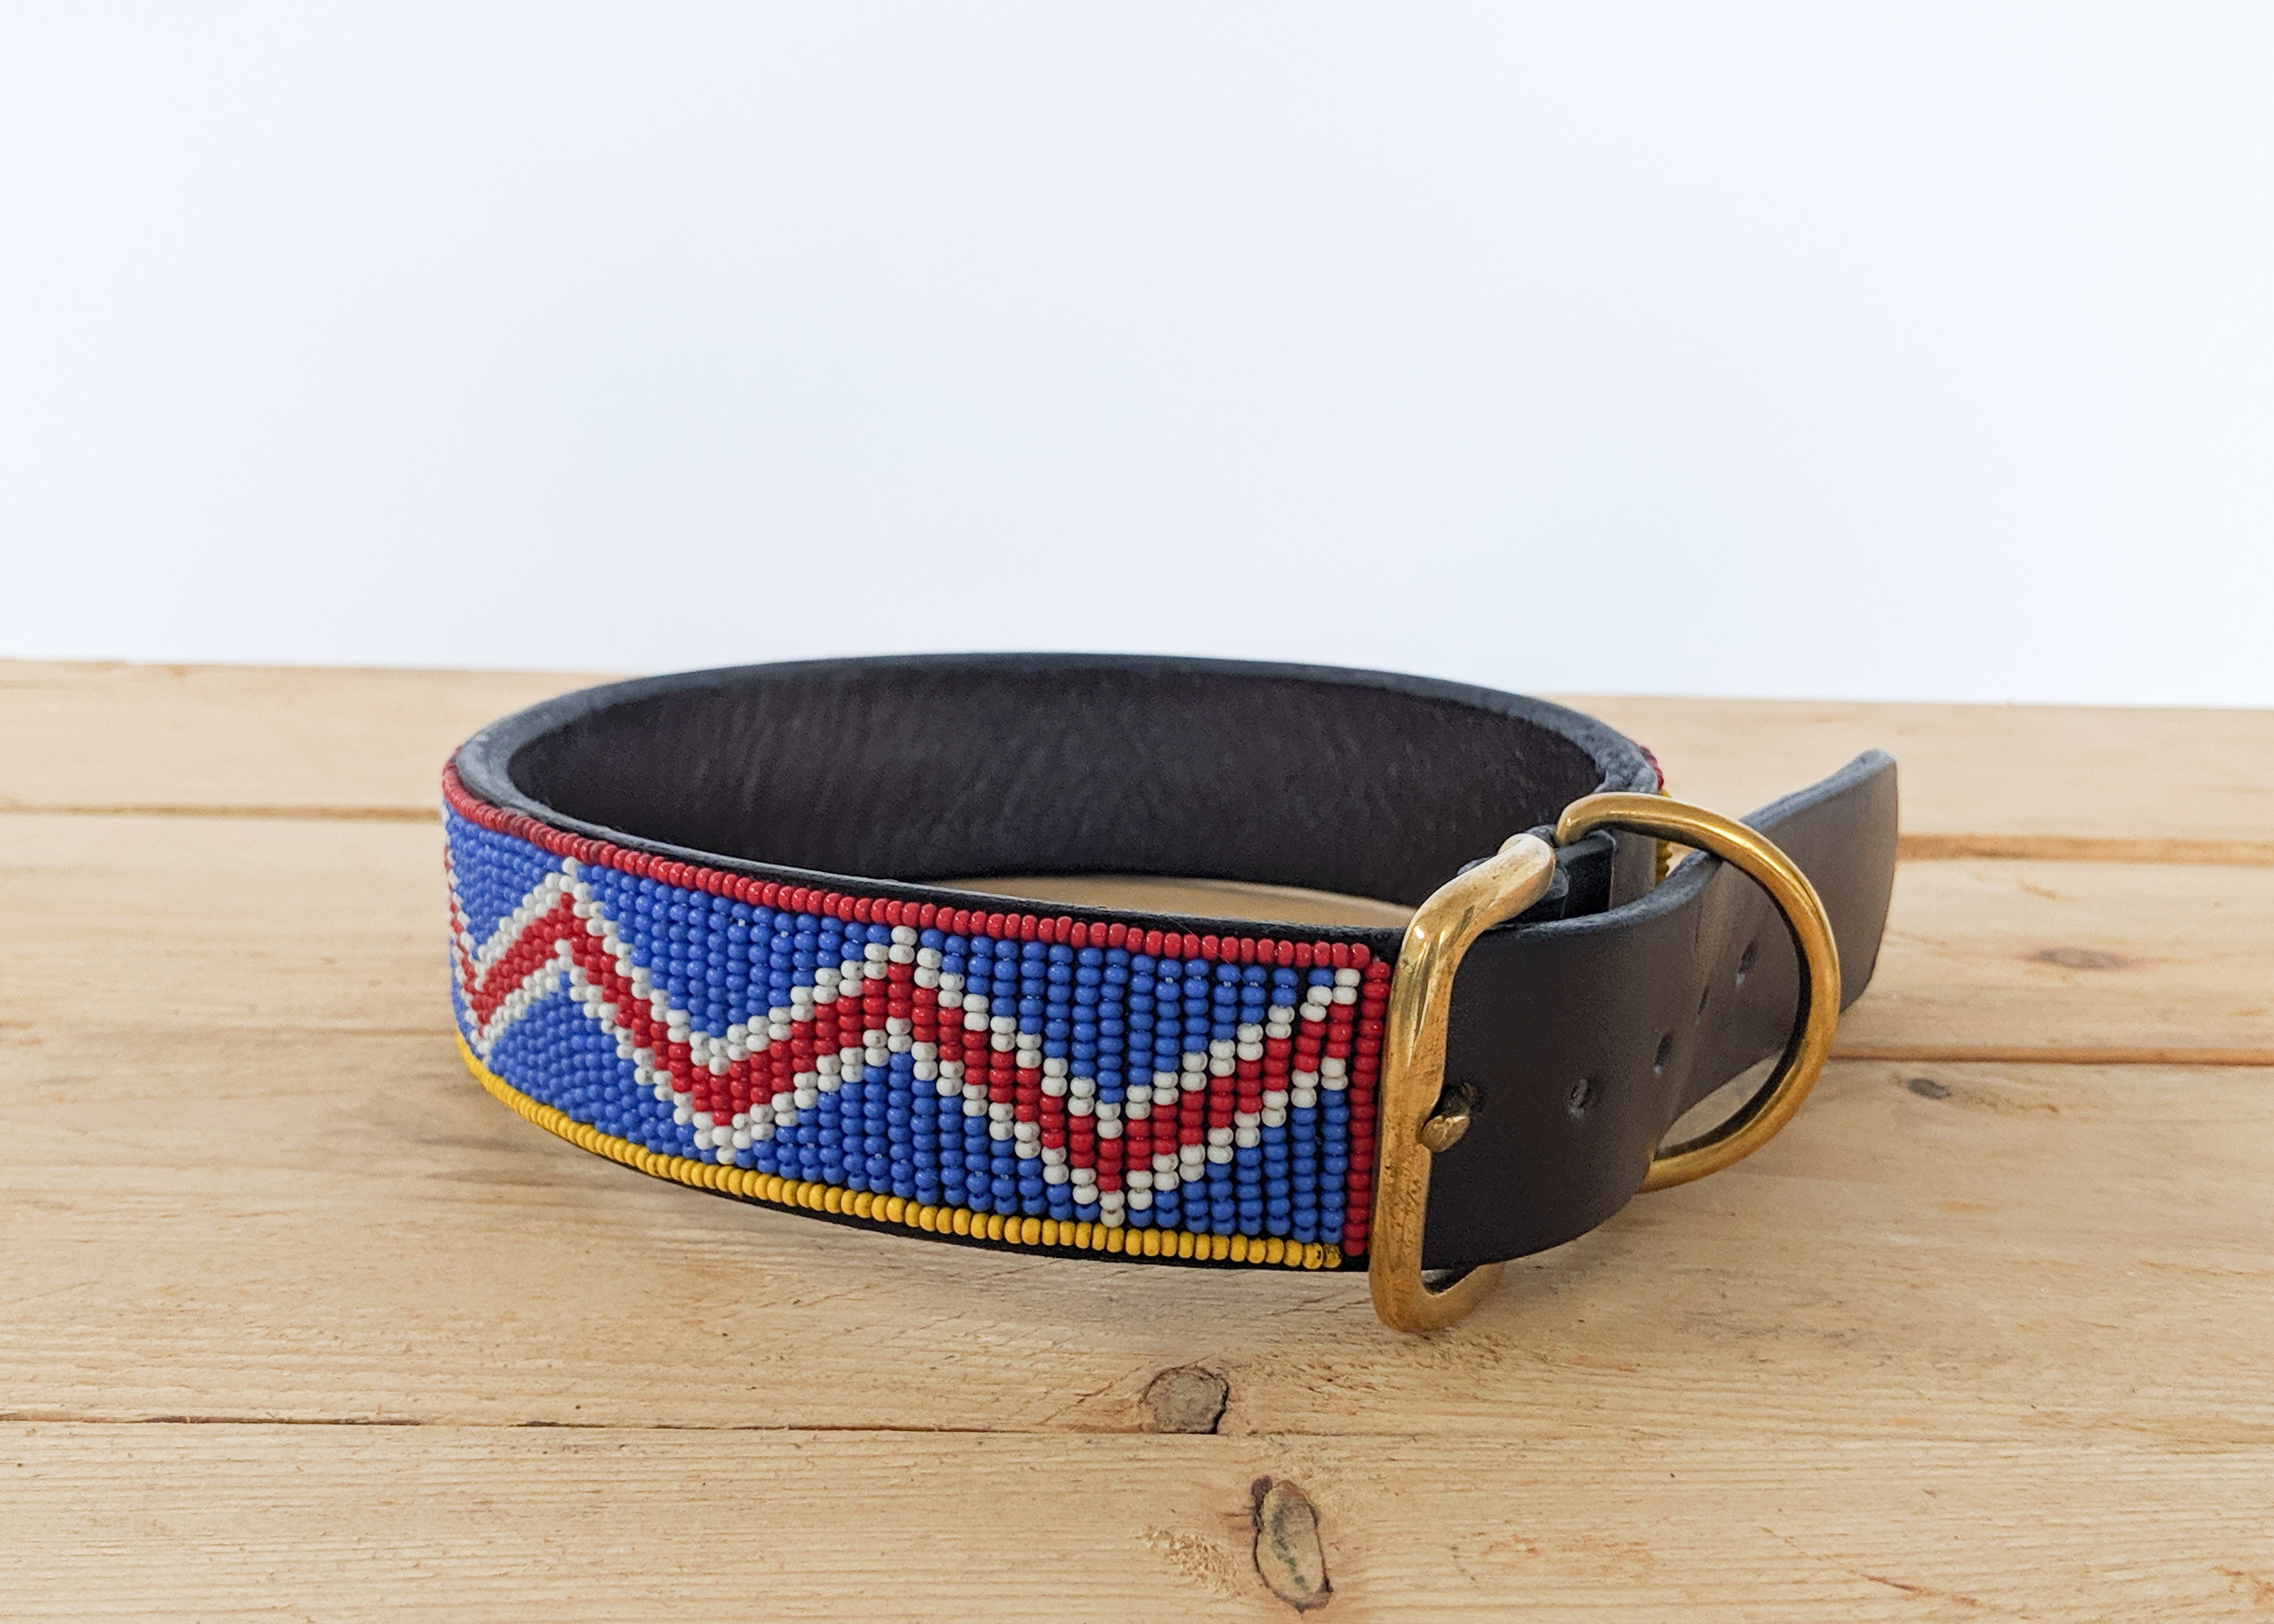 Blue and red Masai beaded dog collar